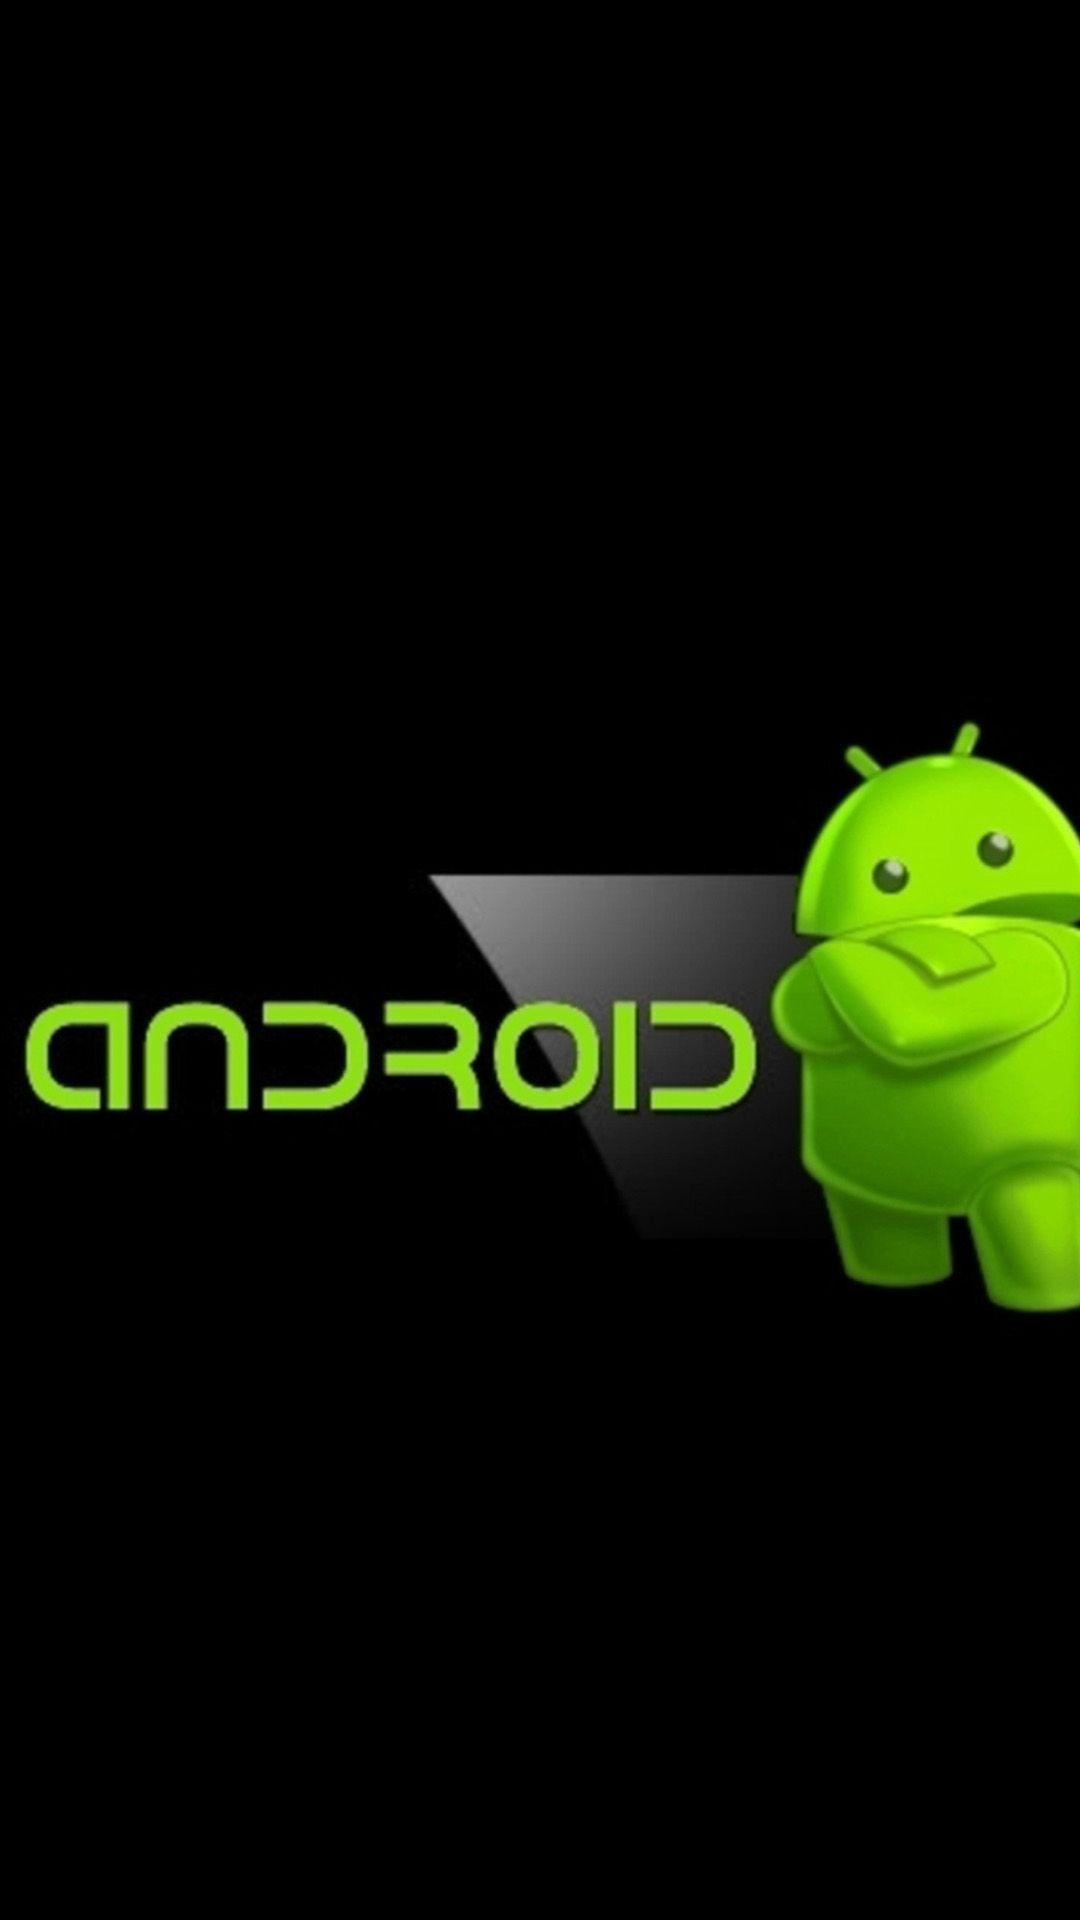 android logo wallpapers